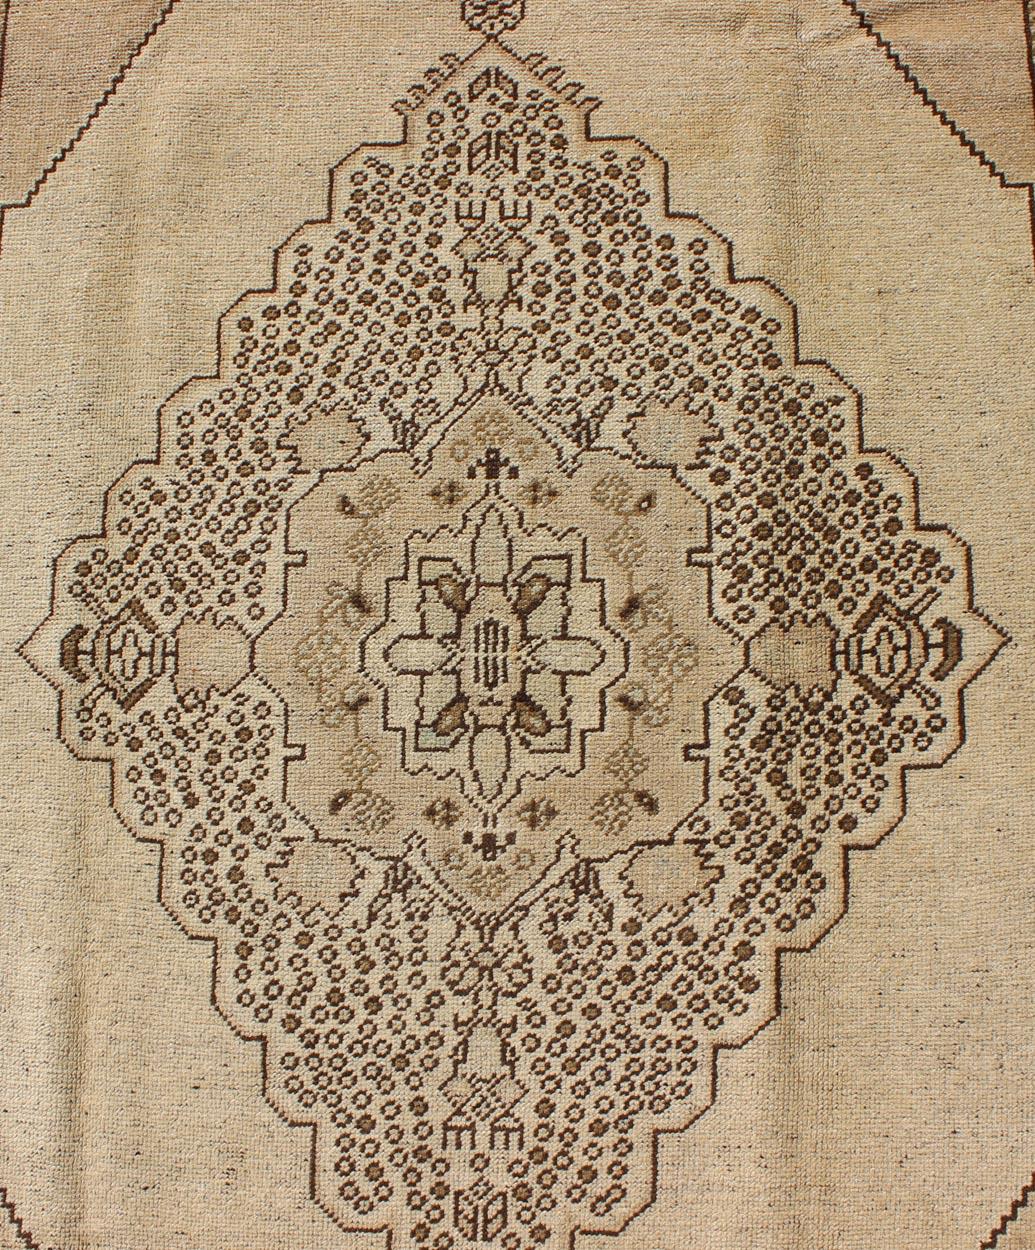 Measures: 5'7 x 10'2

This vintage Turkish Oushak sets on a neutral sandy ground with a central medallion stylized with small details. The background is pale khaki color, while the border has a botanical pattern of vines and flowers with light